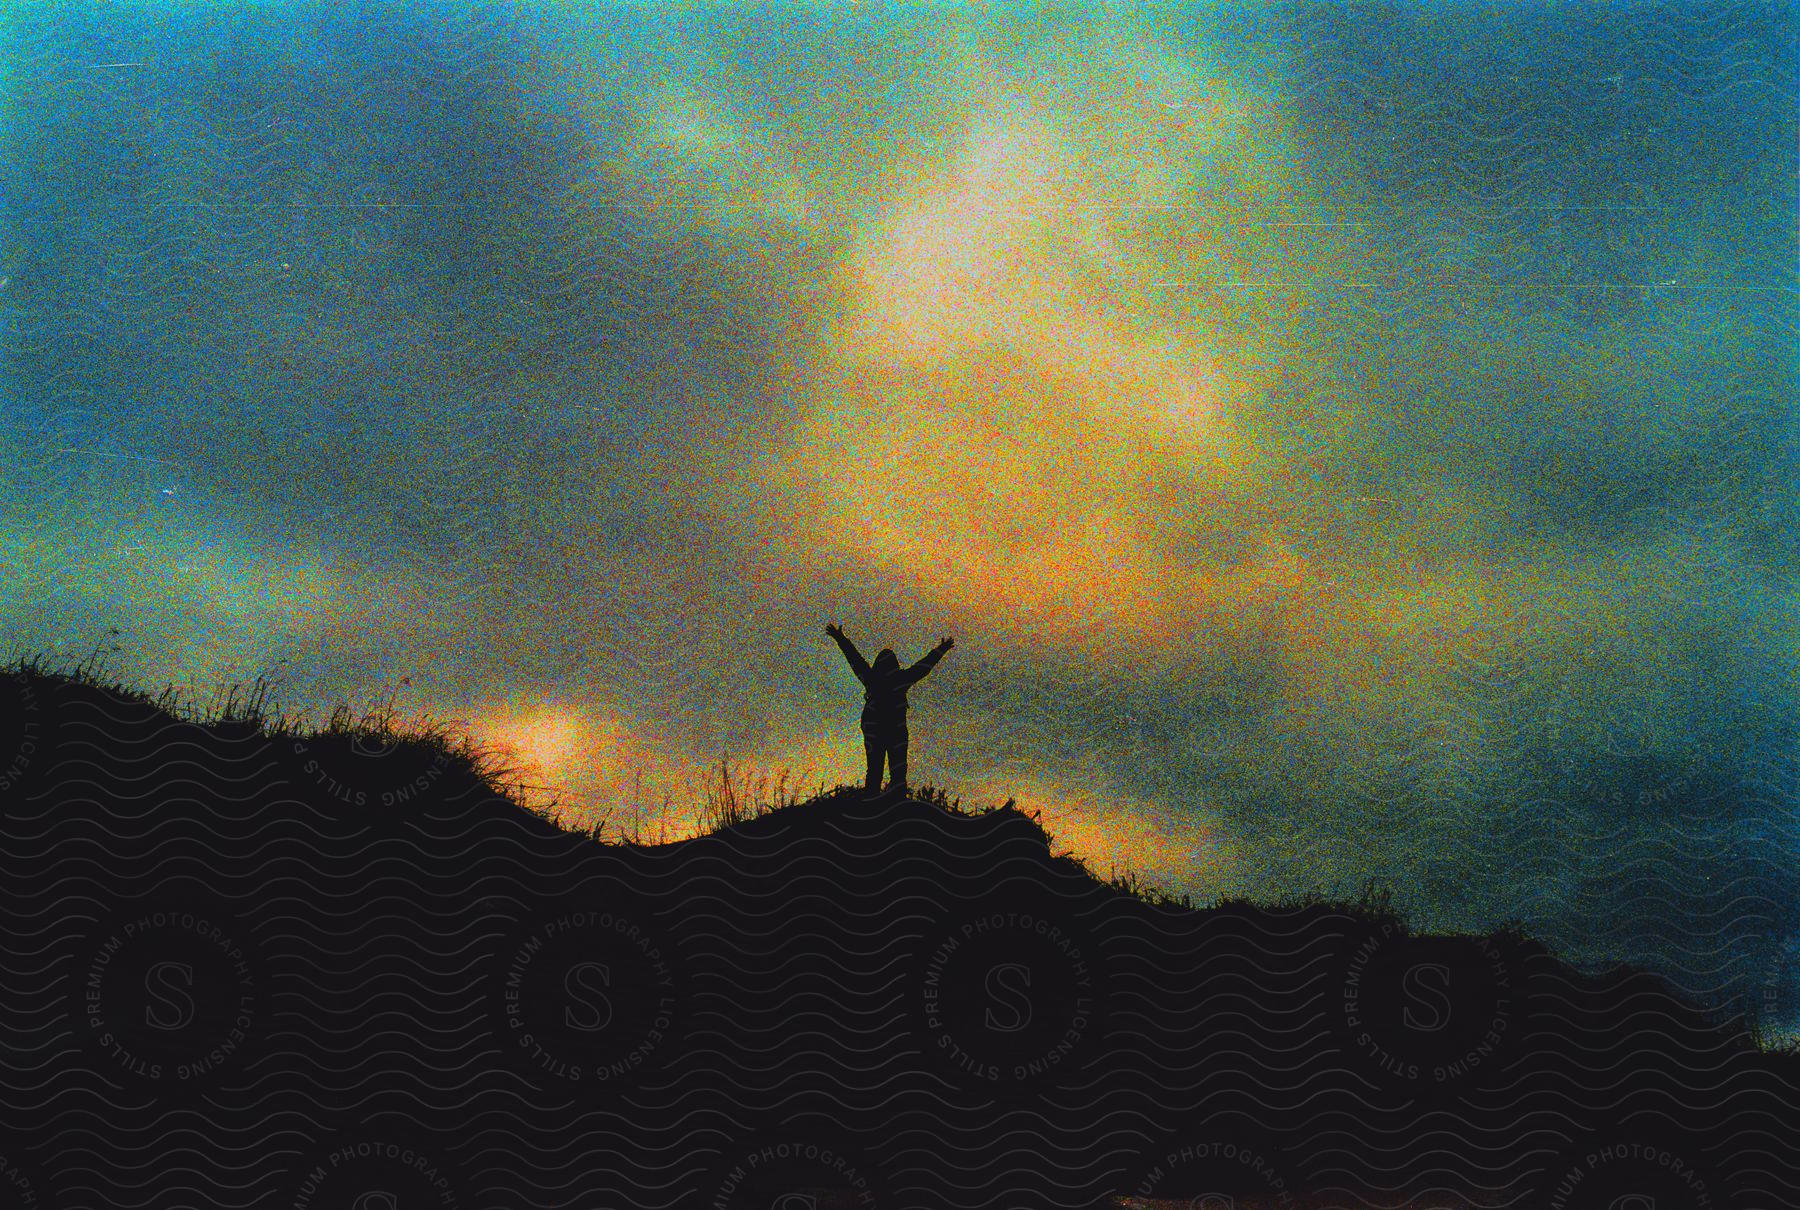 Silhouette of a person with arms up on top of a peak.